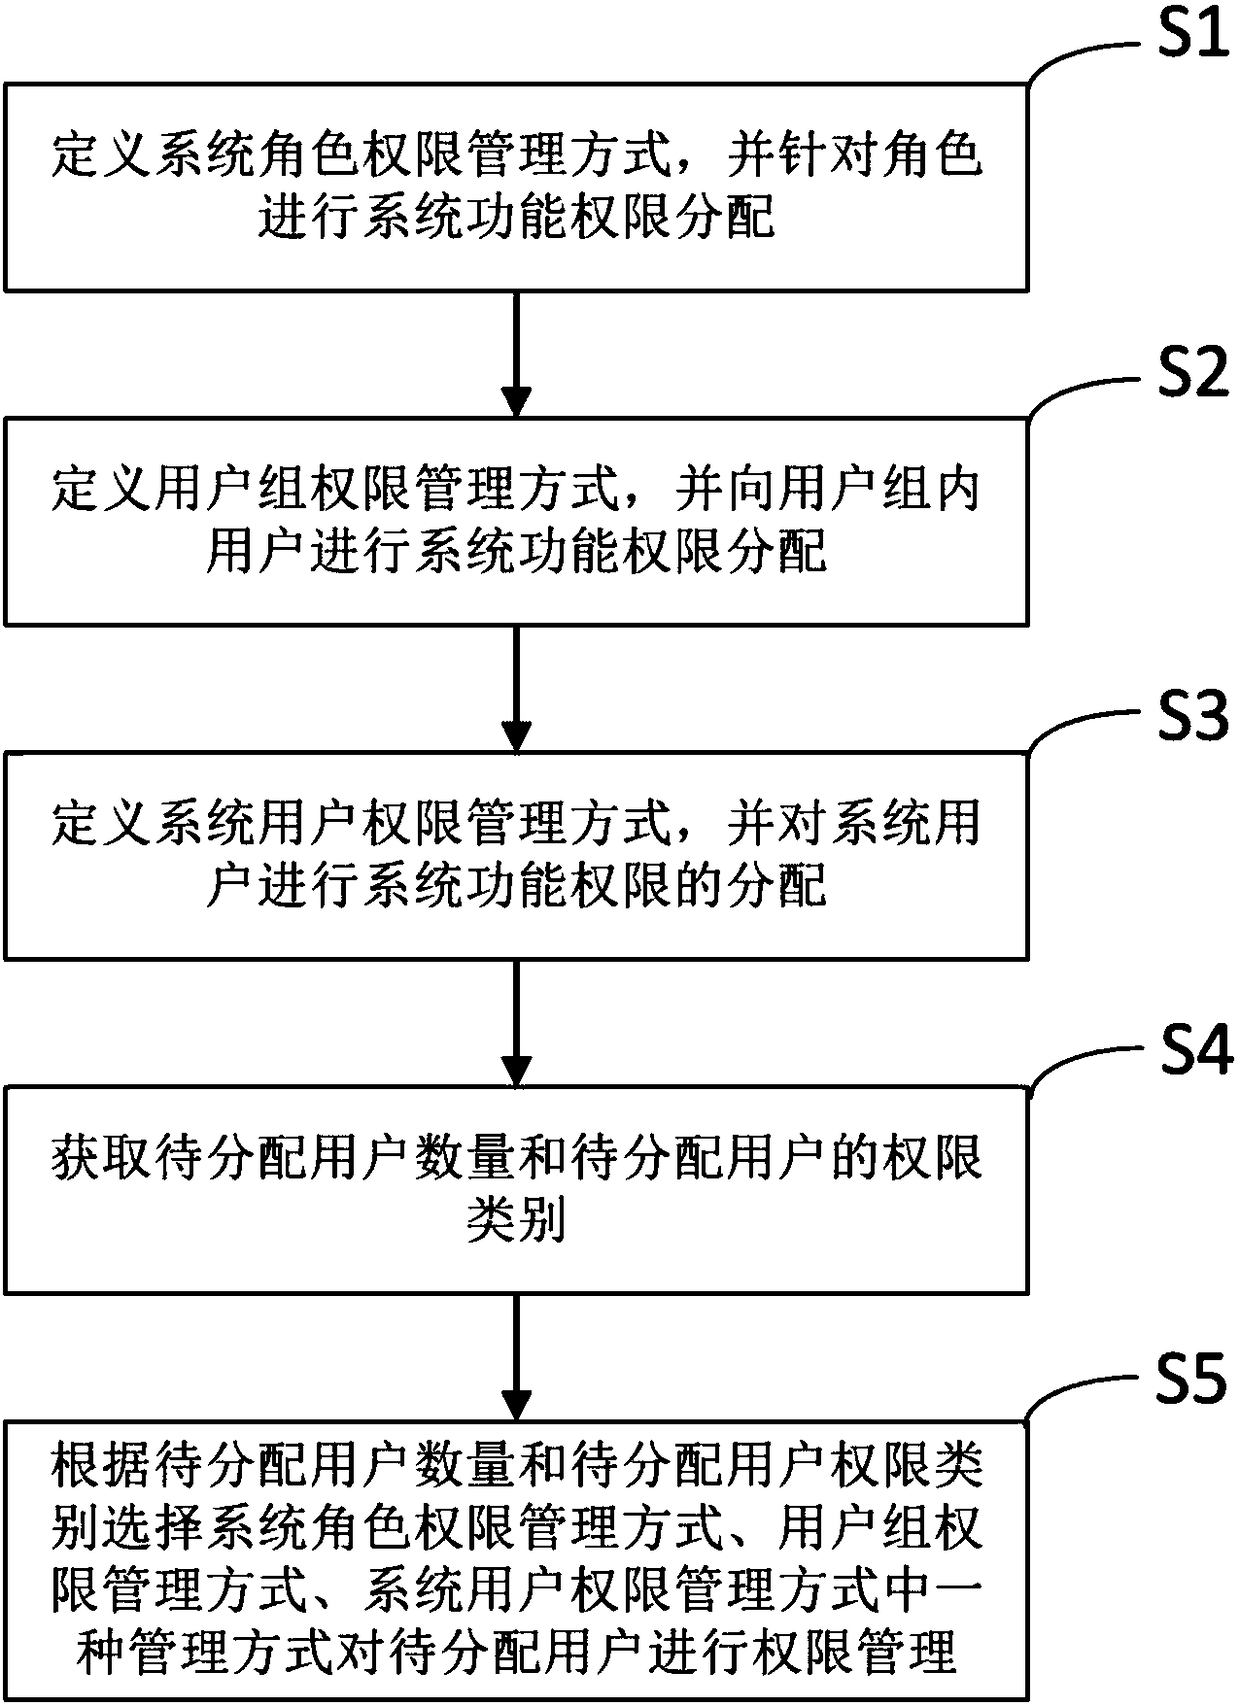 System permission management method for users, user groups and roles